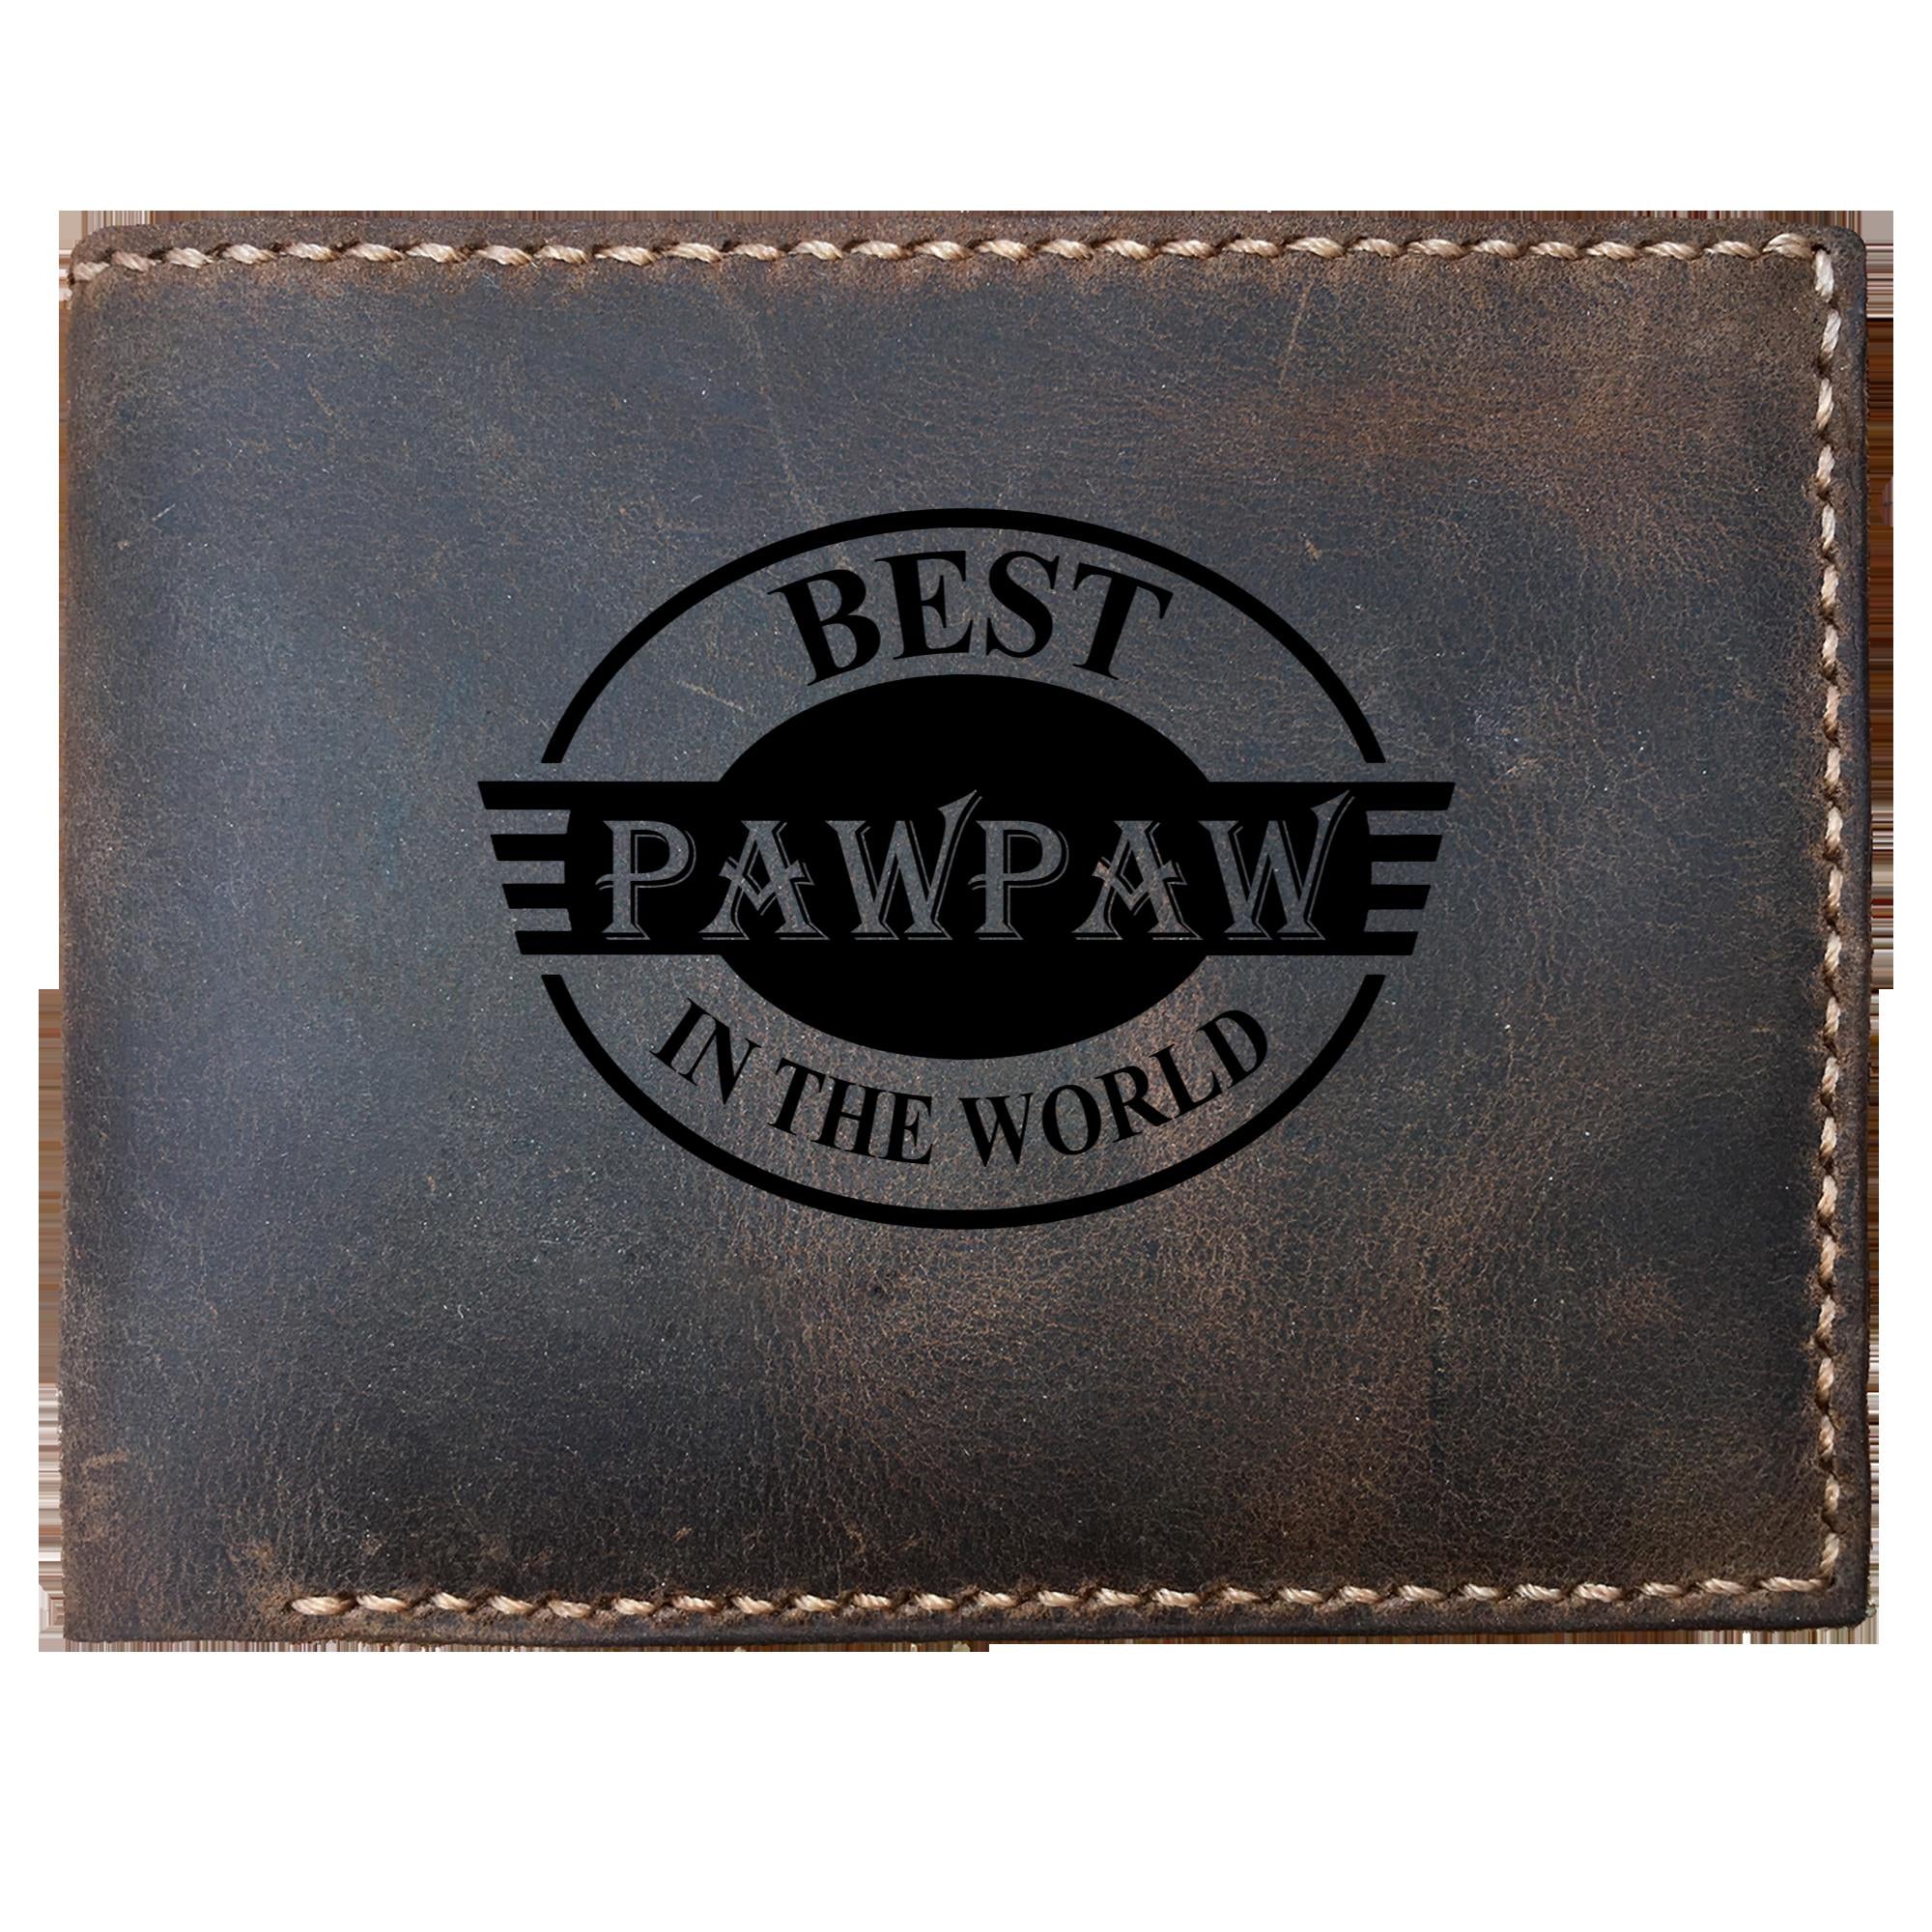 Funny Skitongifts Custom Laser Engraved Bifold Leather Wallet Vintage Best Pawpaw In The World